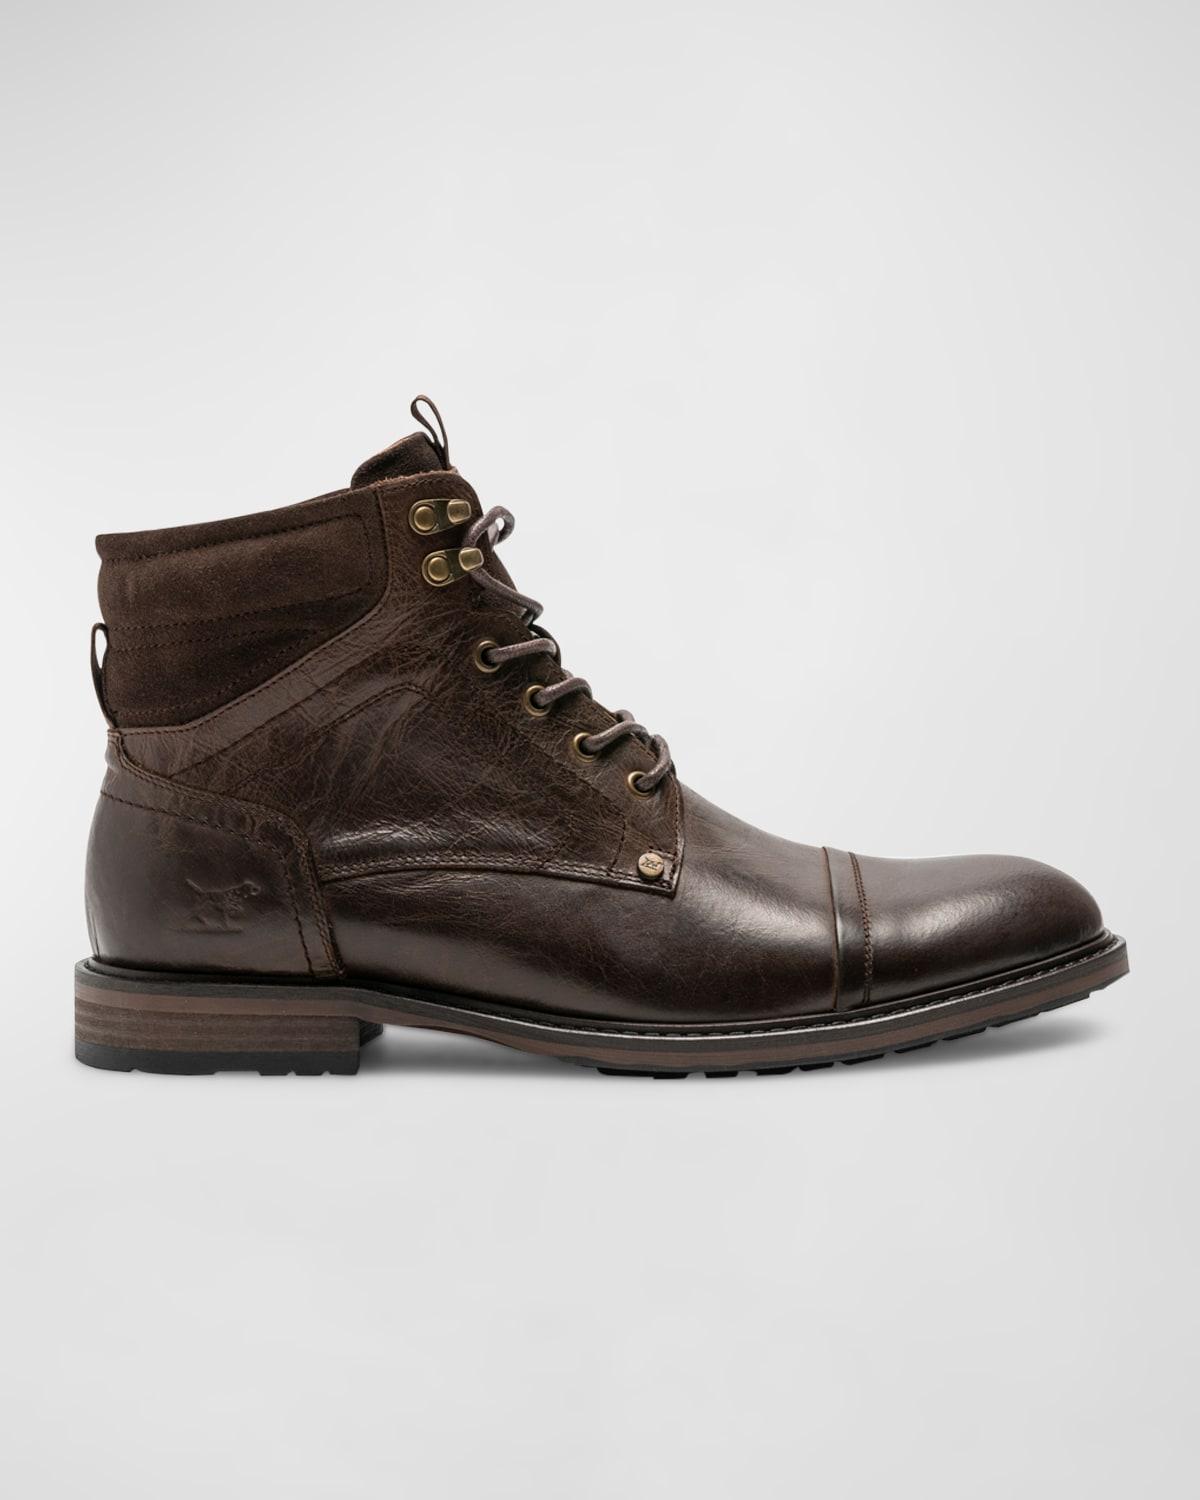 Rodd & Gunn Dunedin Leather Lace-up Military Boots in Brown for Men | Lyst